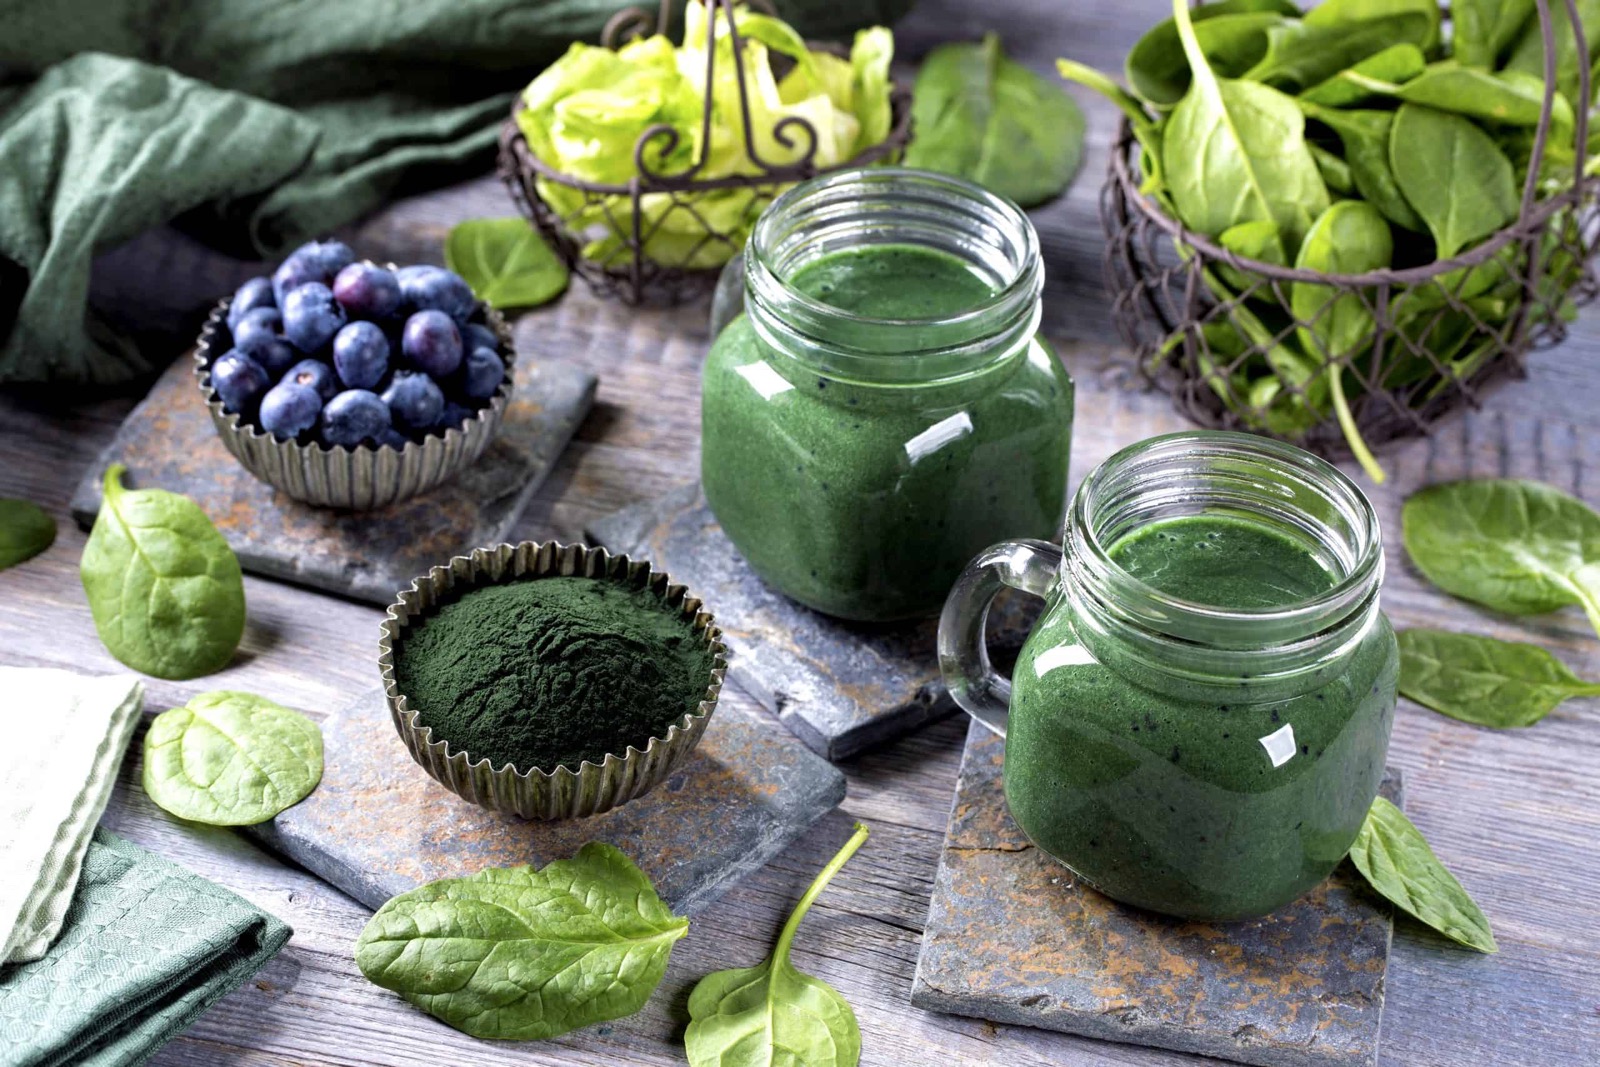 What Shade Of Green Are You? Quiz Green spirulina smoothies